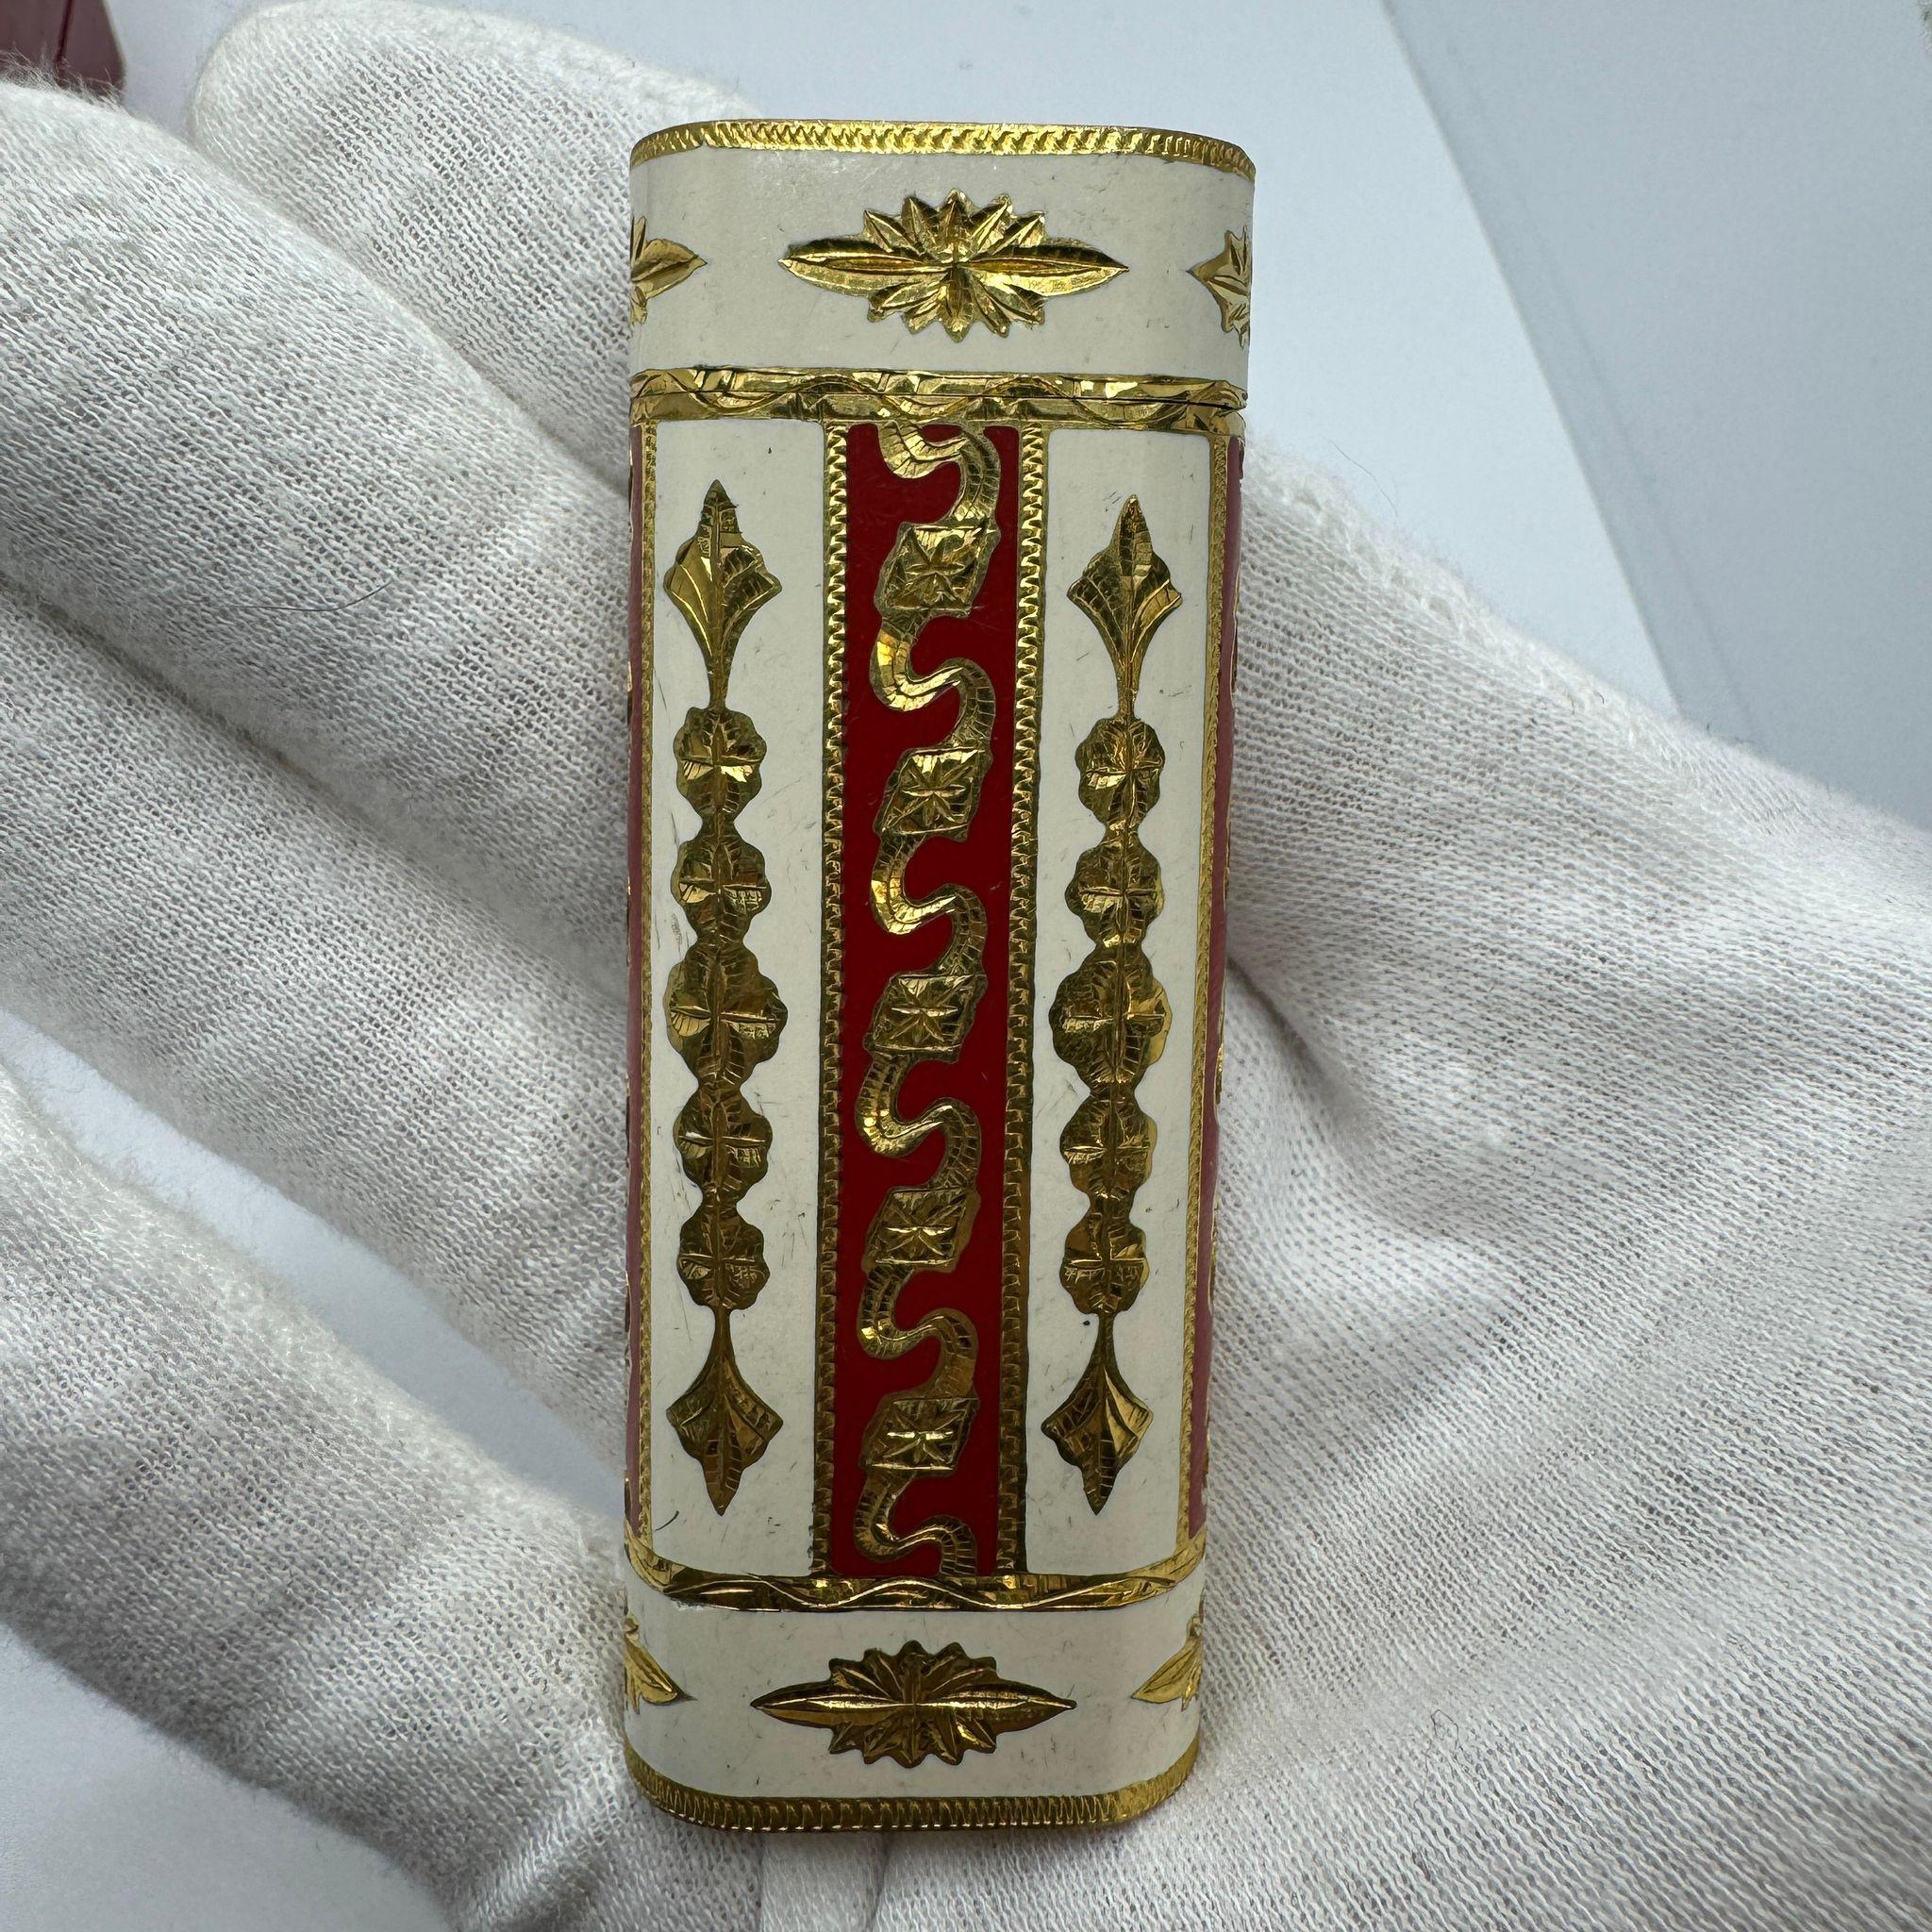 Le Must de Cartier Very Rare Royking Lighter, 18k Gold Plating & Enamel Inlay  In Excellent Condition For Sale In New York, NY